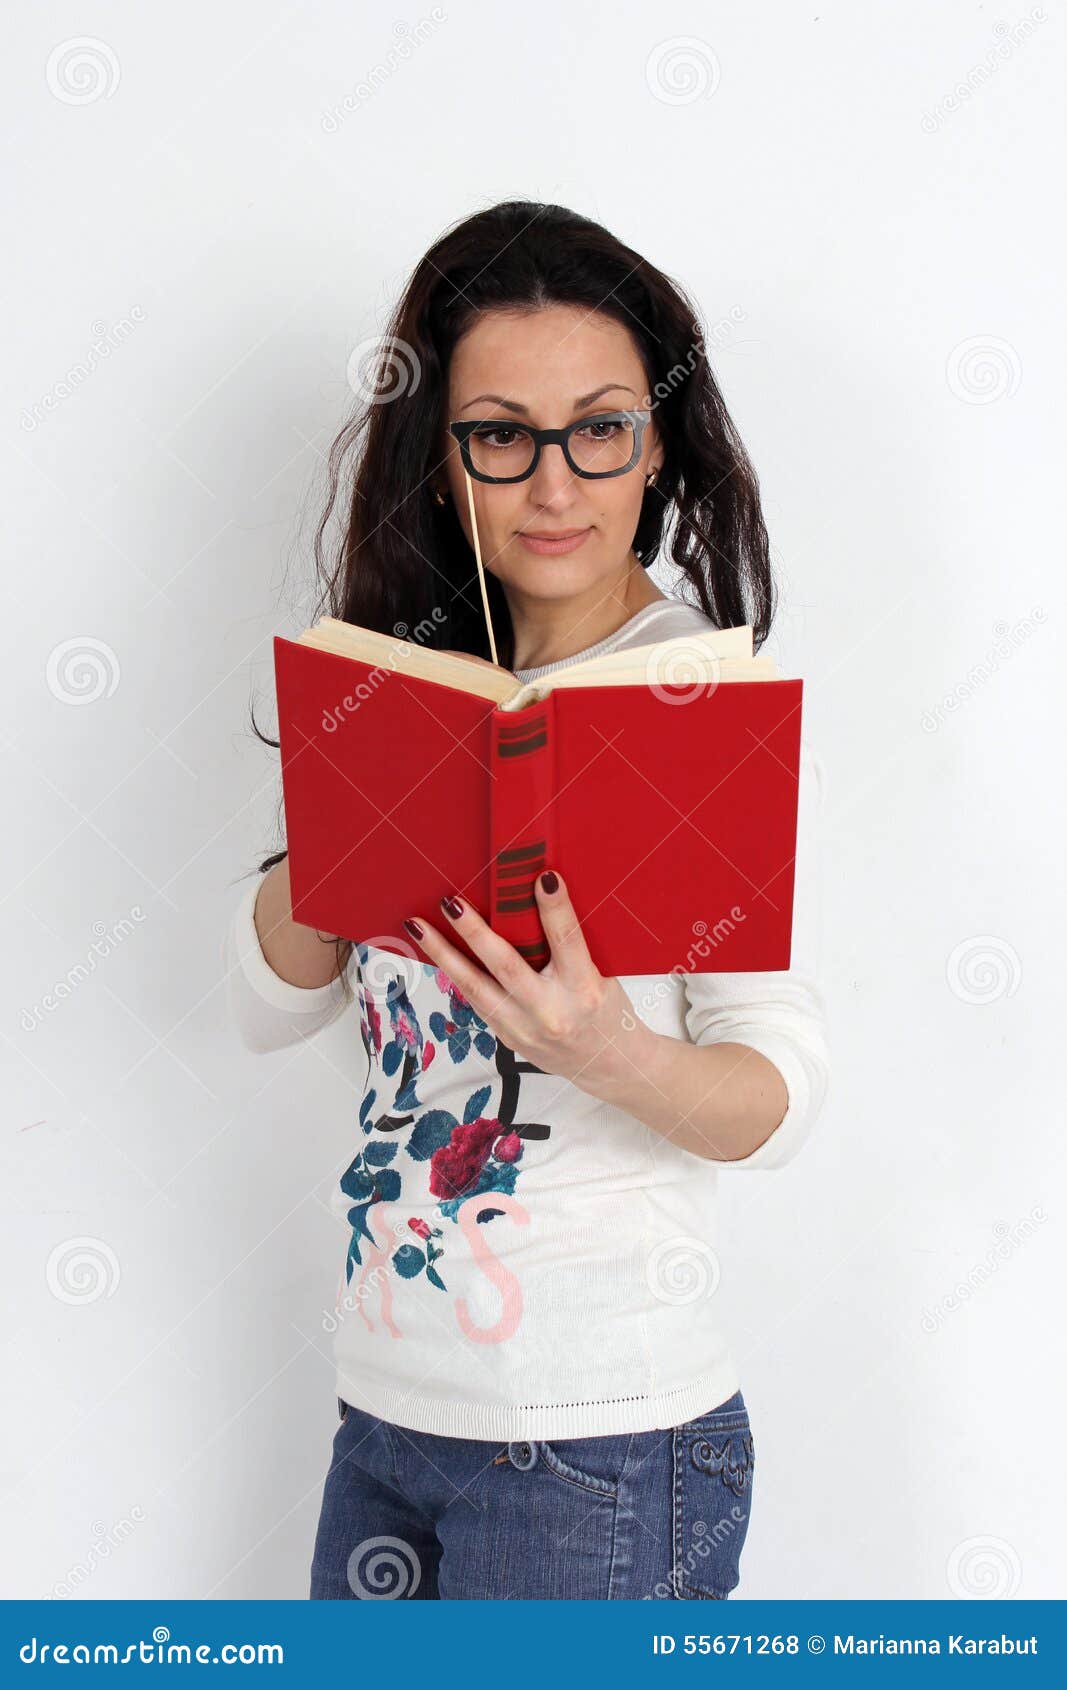 ABeautiful Young Woman Standing With Red Book In Hand. Studio Stock